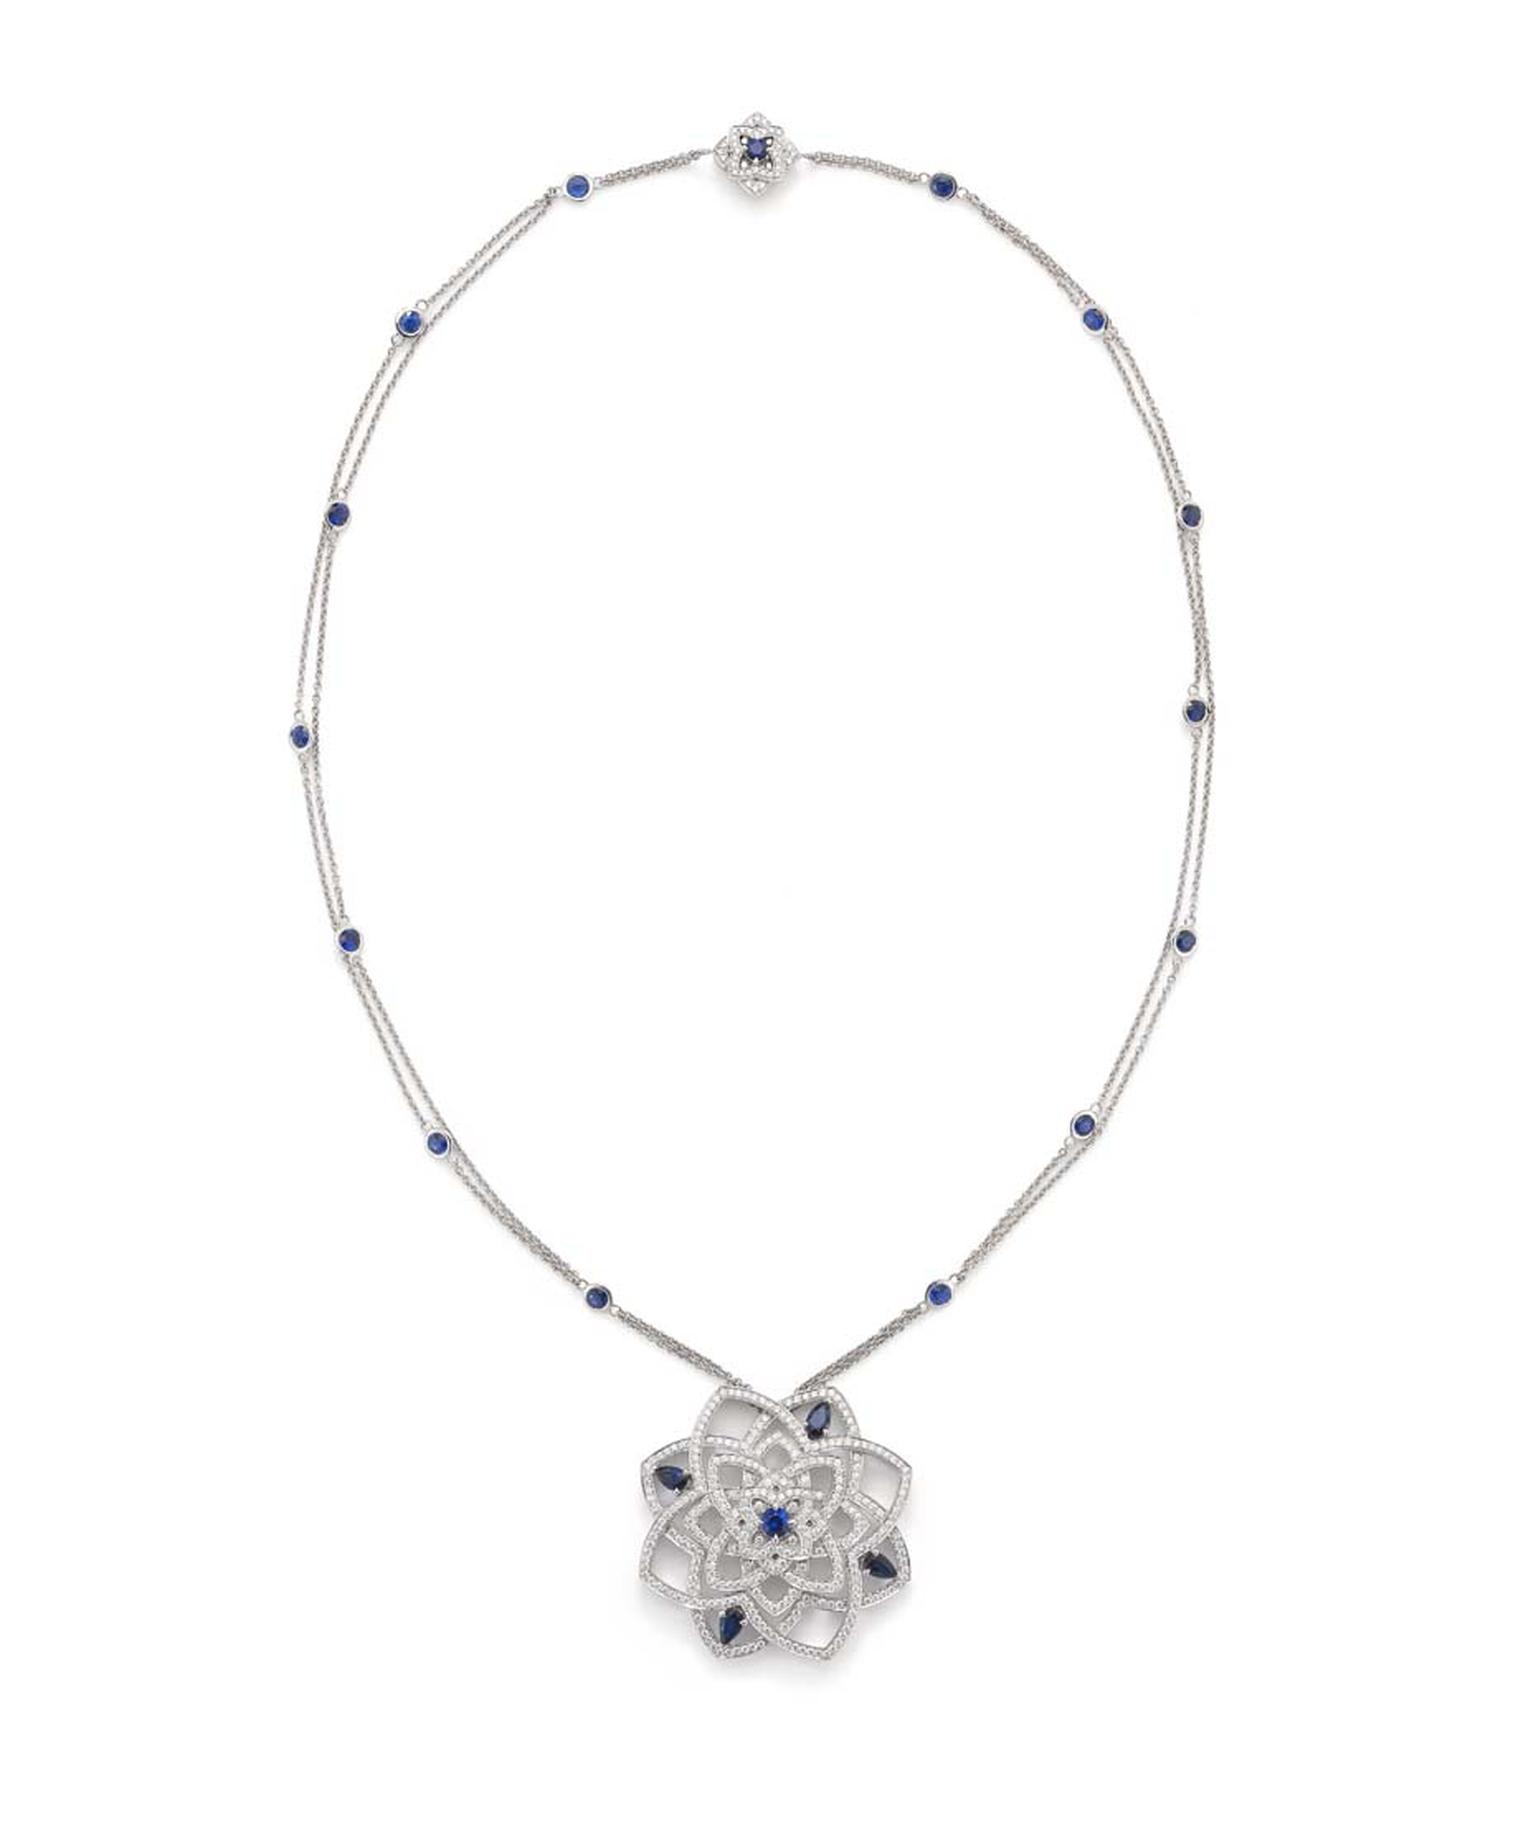 Mappin & Webb Floresco collection high jewellery pendant in white gold with diamonds and sapphires, suspended from a sapphire-studded chain with a diamond and sapphire clasp